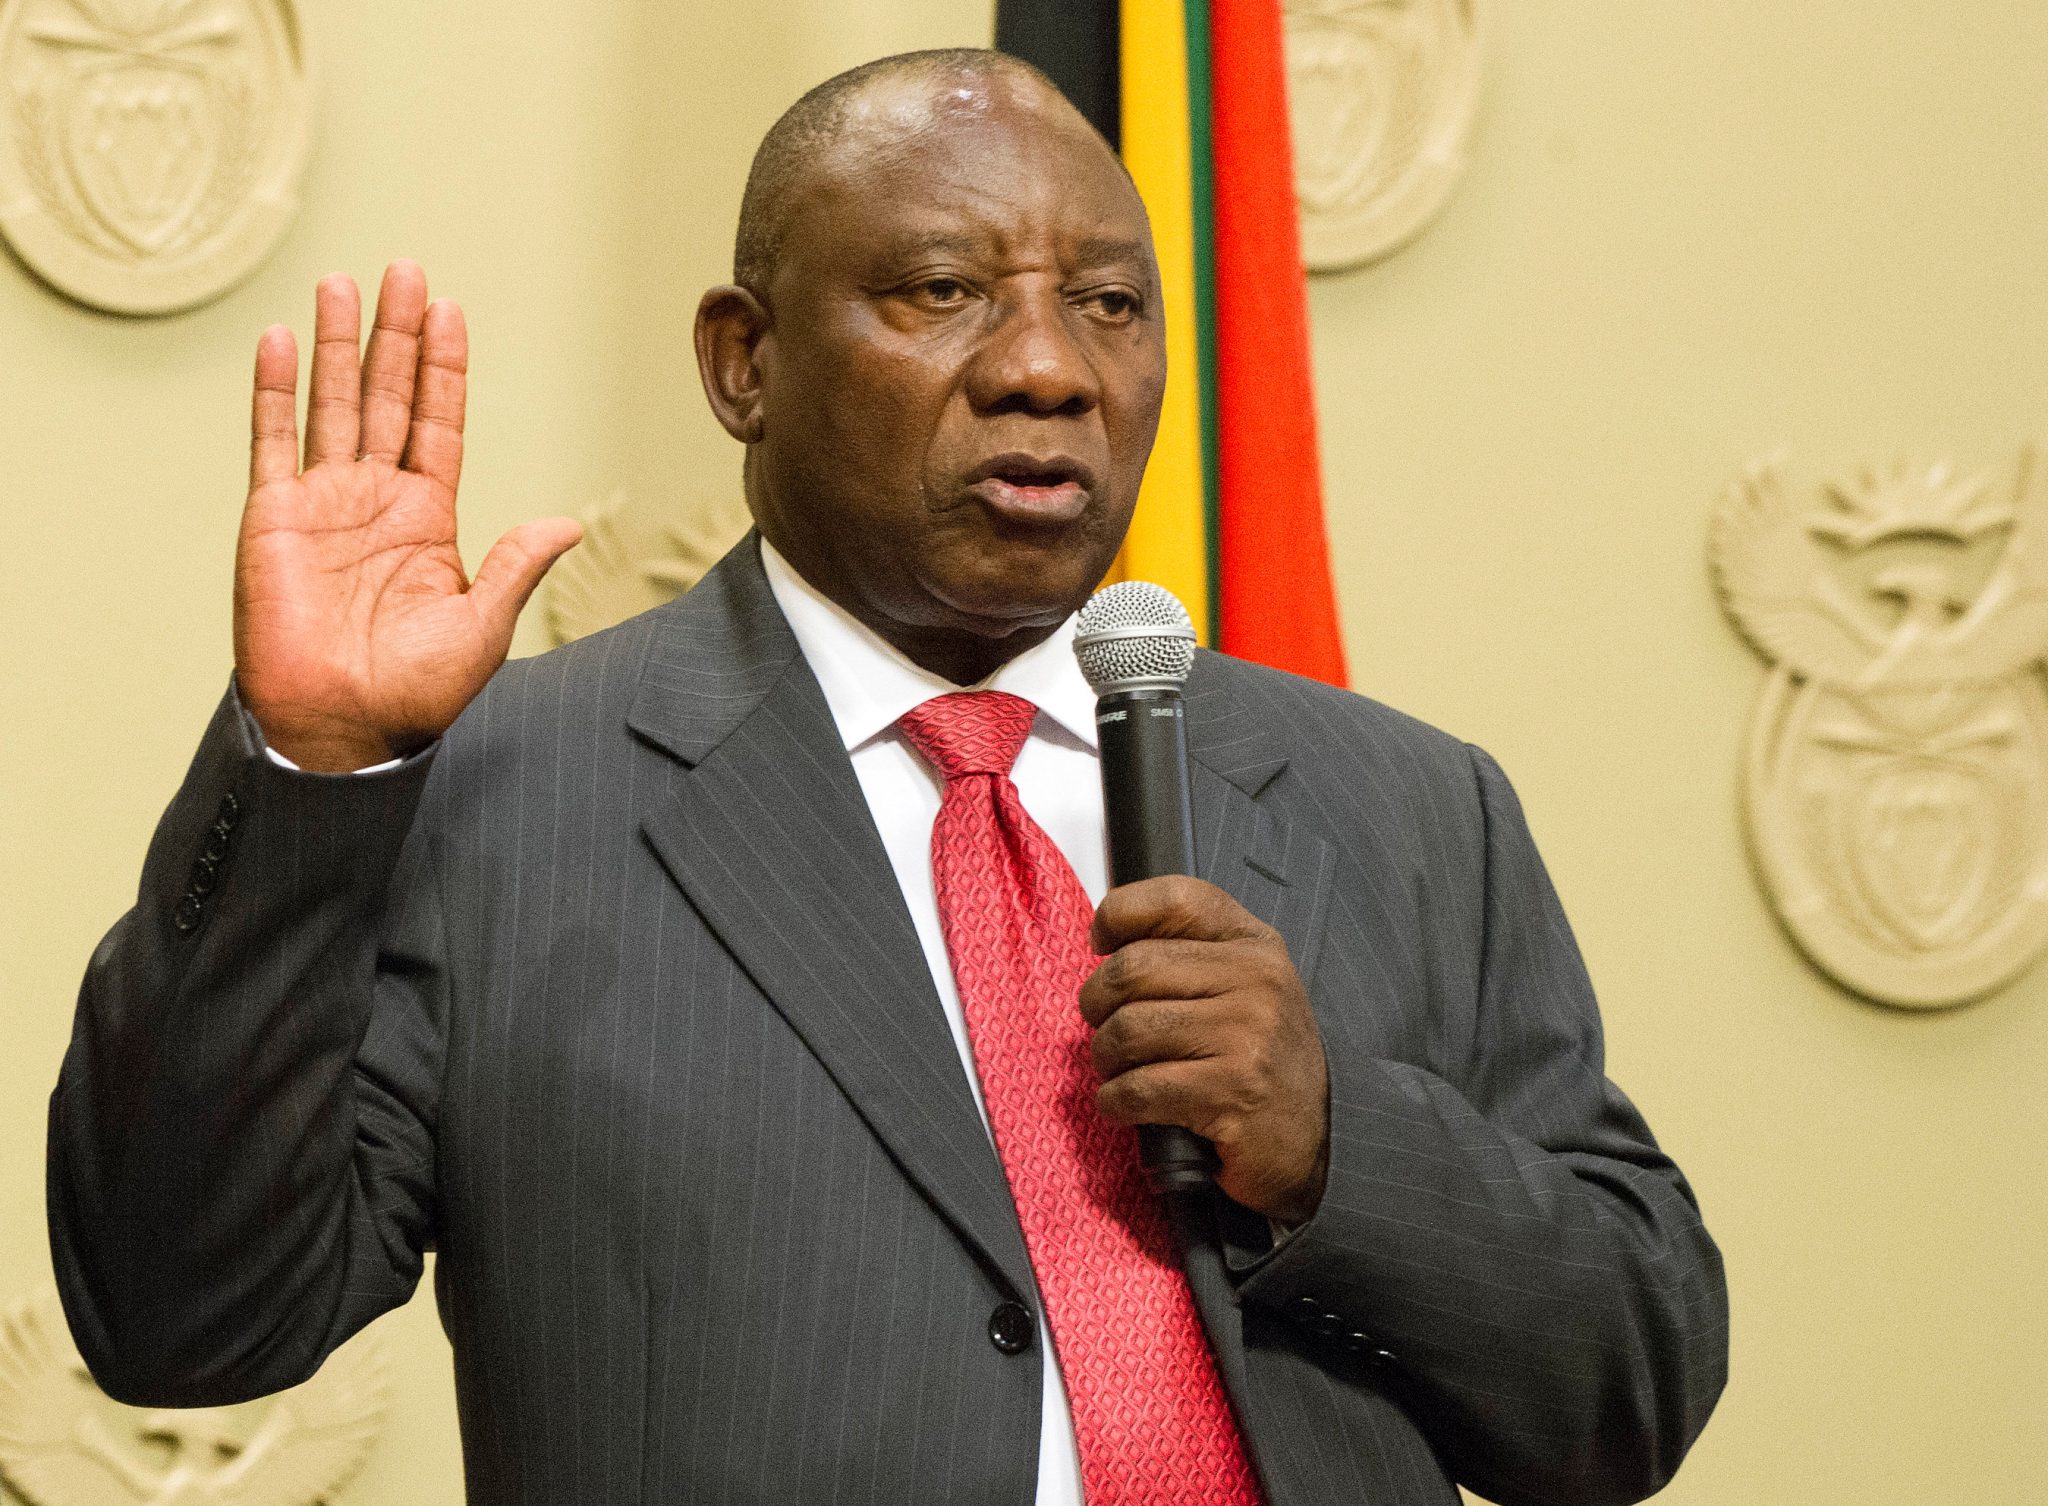 President Ramaphosa replaces Zuma after appointment by ANC Party: Cyril Ramaphosa is sworn in as the new South Africa president at the parliament in Cape Town, South Africa February 15, 2018 | REUTERS